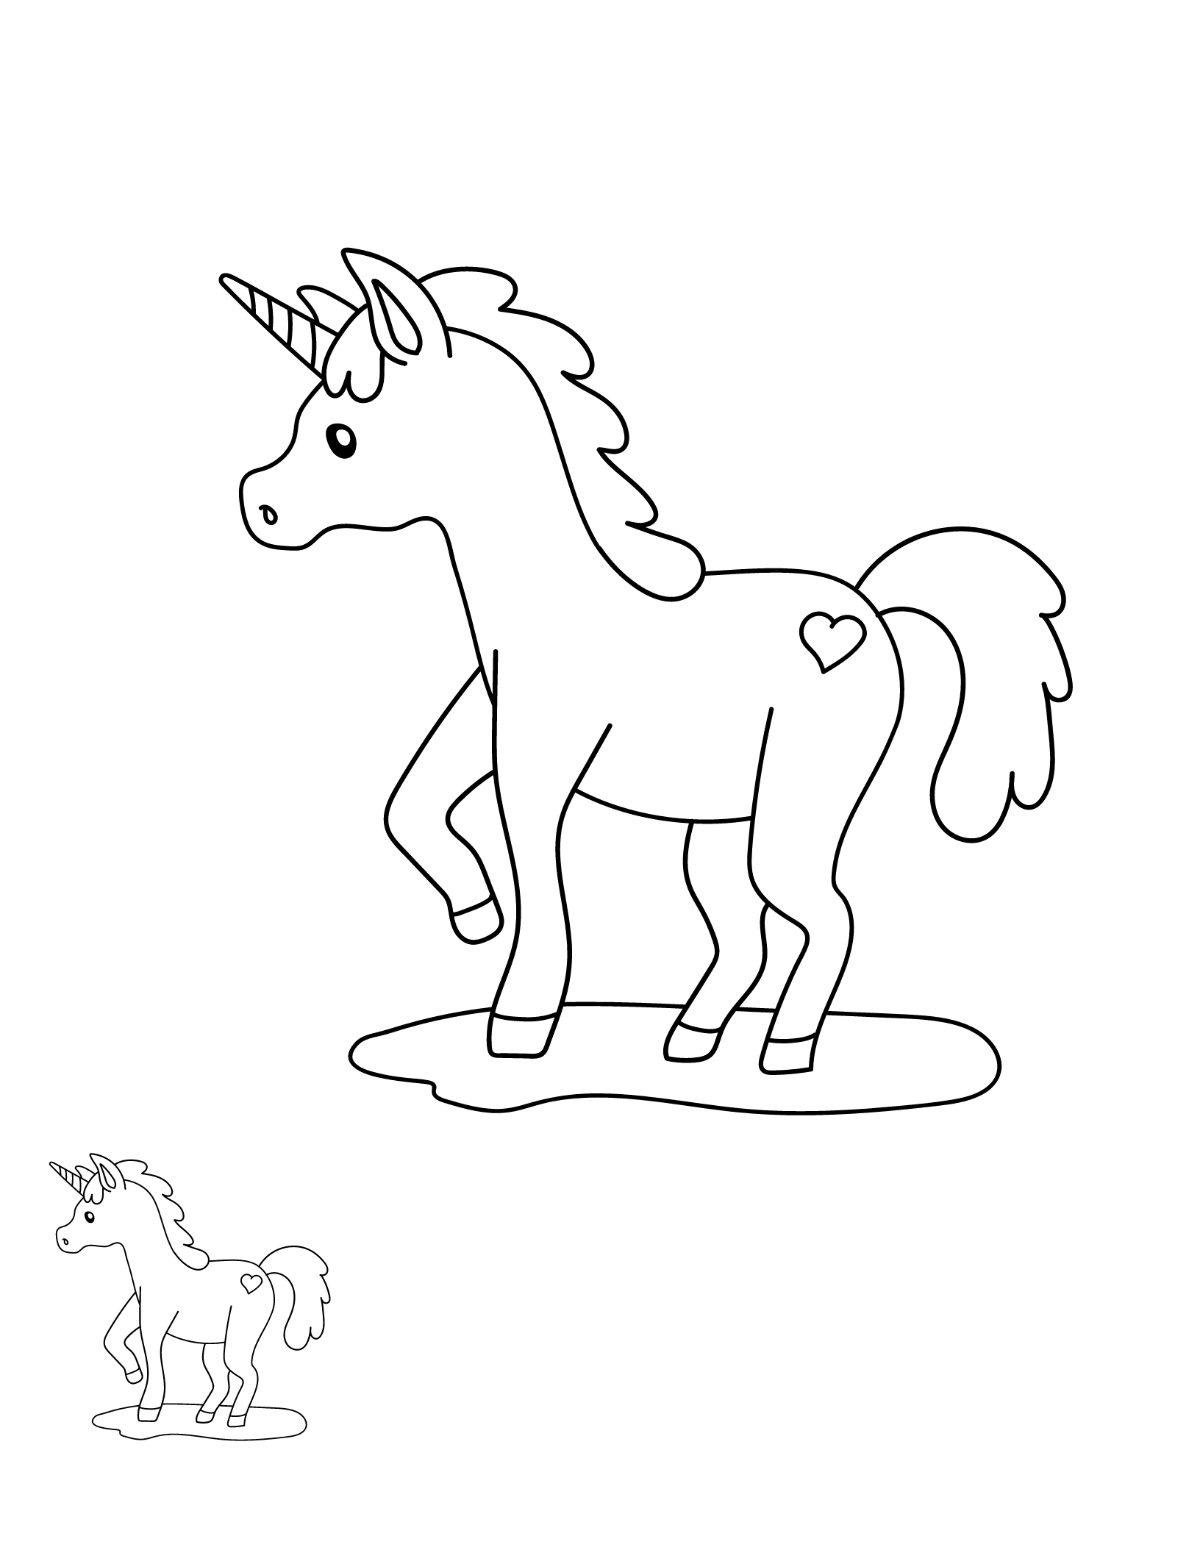 Easy Unicorn Coloring Page